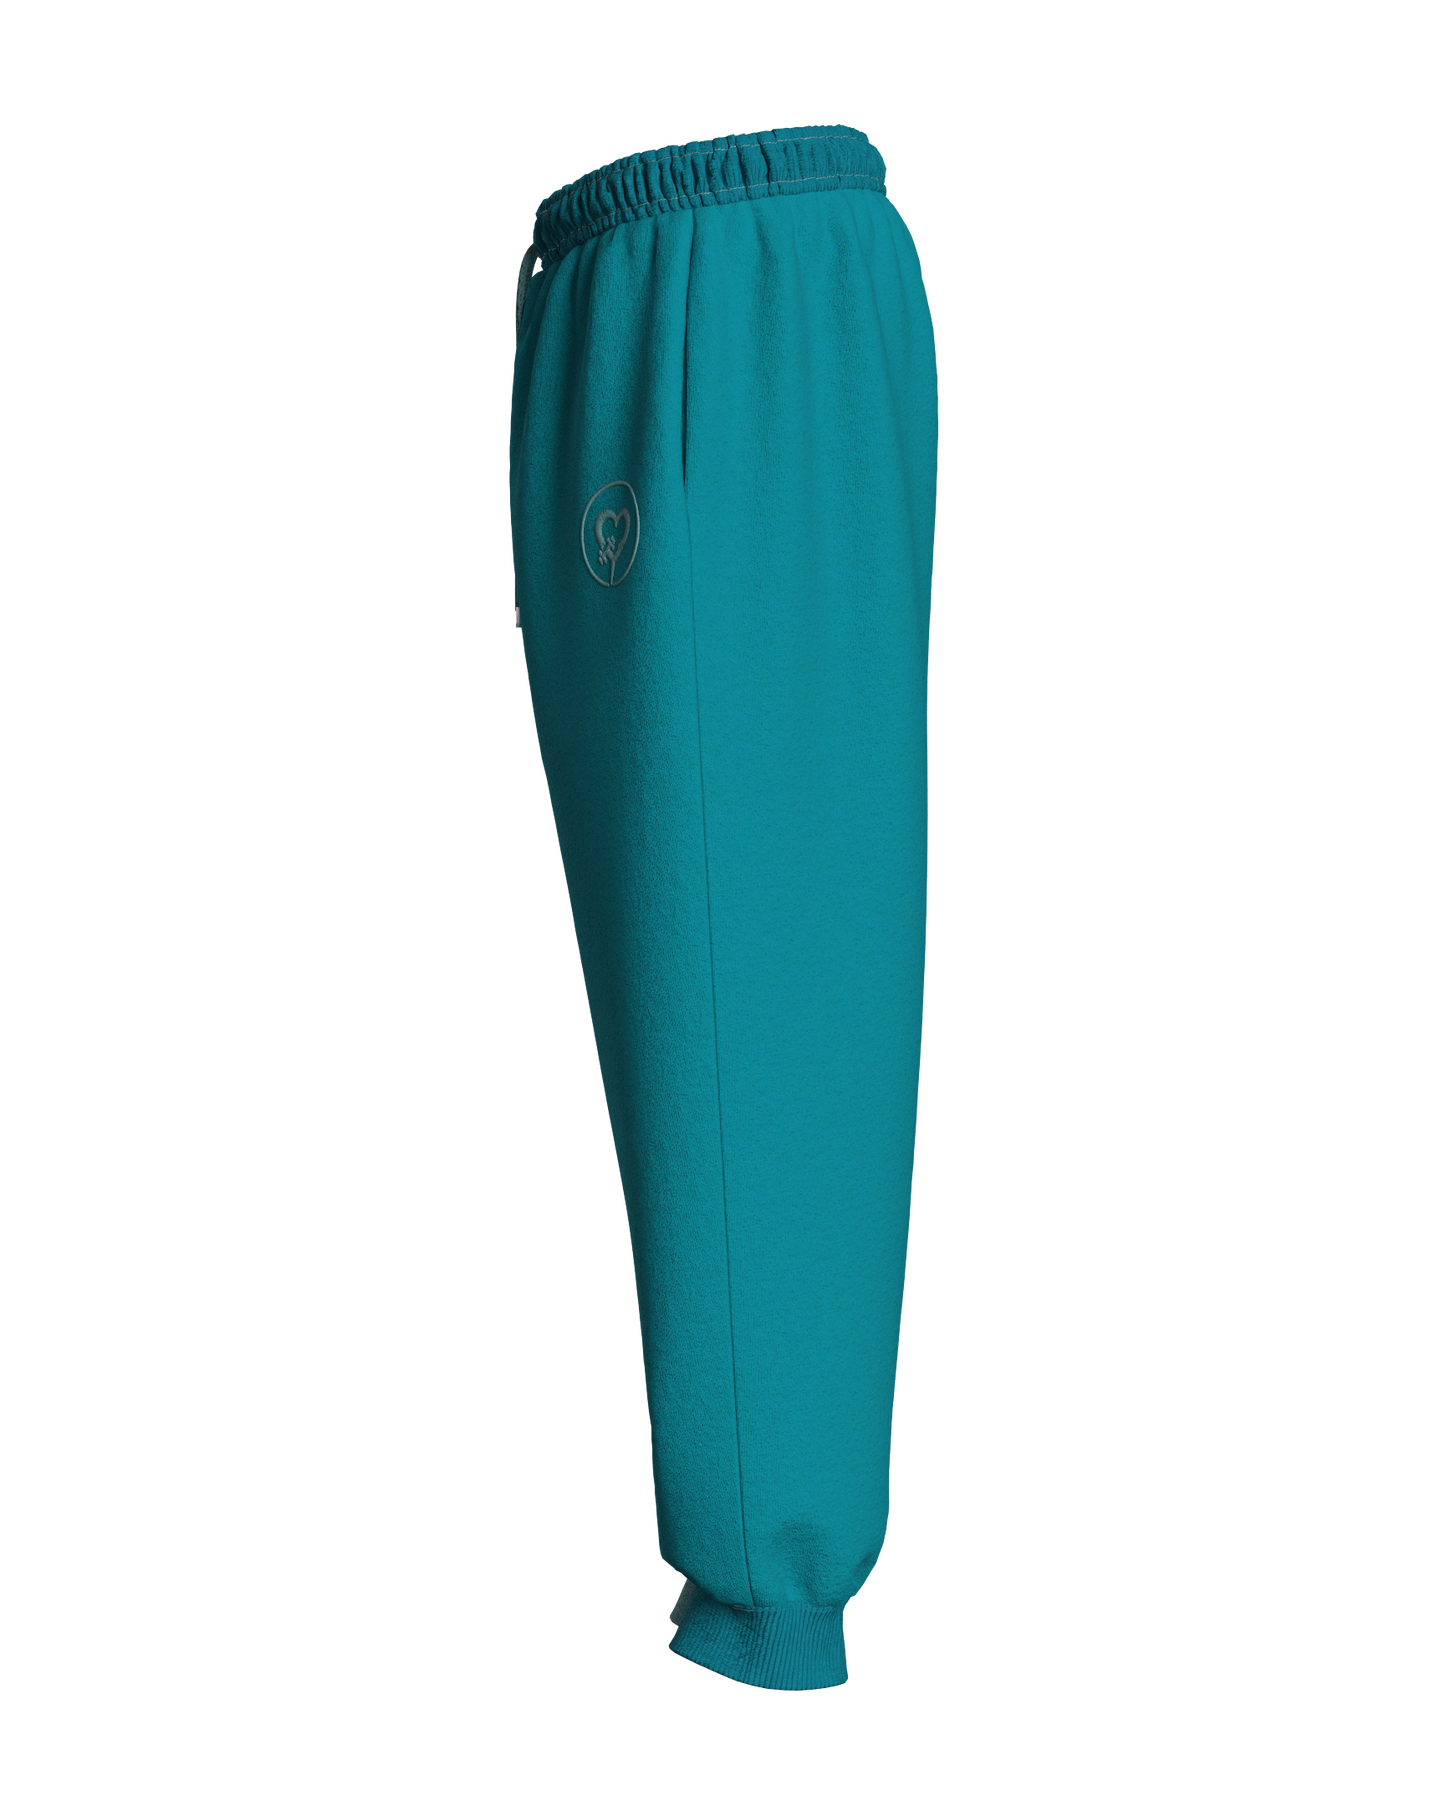 Bermuda Teal So Shadey Sweatsuit - All Sizes (Sold out, but can preorder)